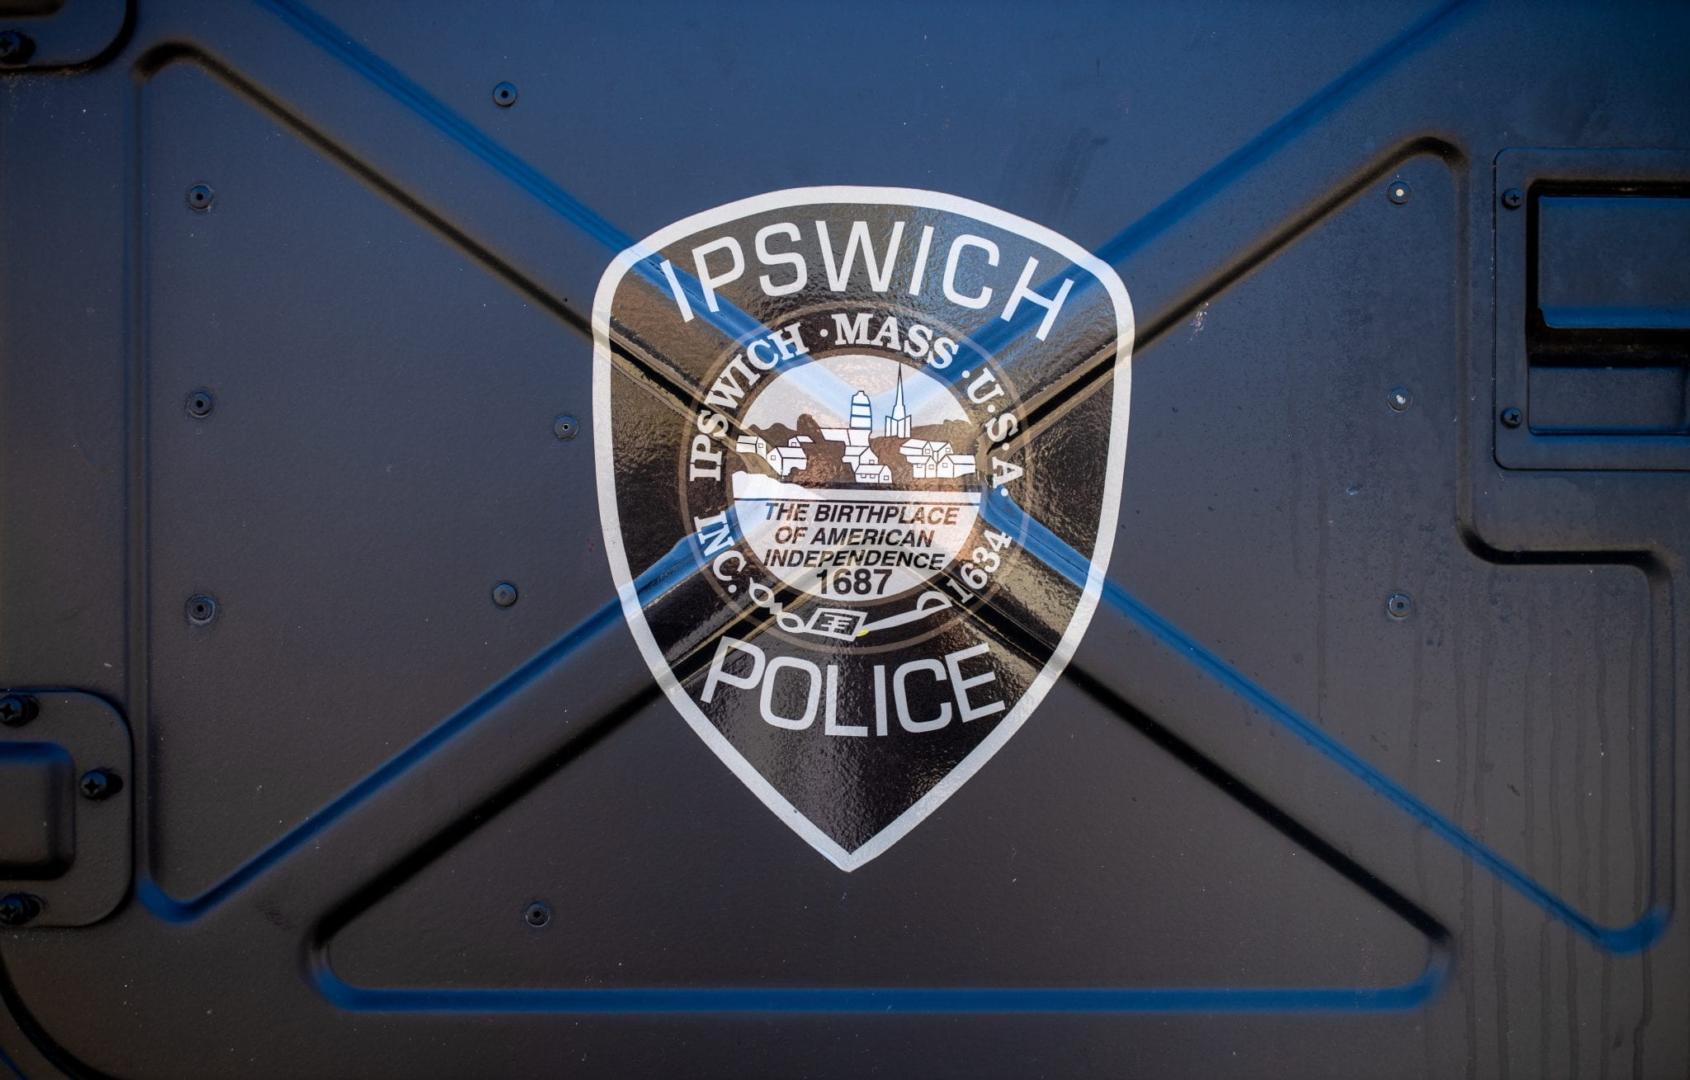 Ipswich Police Arrest Area Man on Drug Charges Following Two-Month Investigation